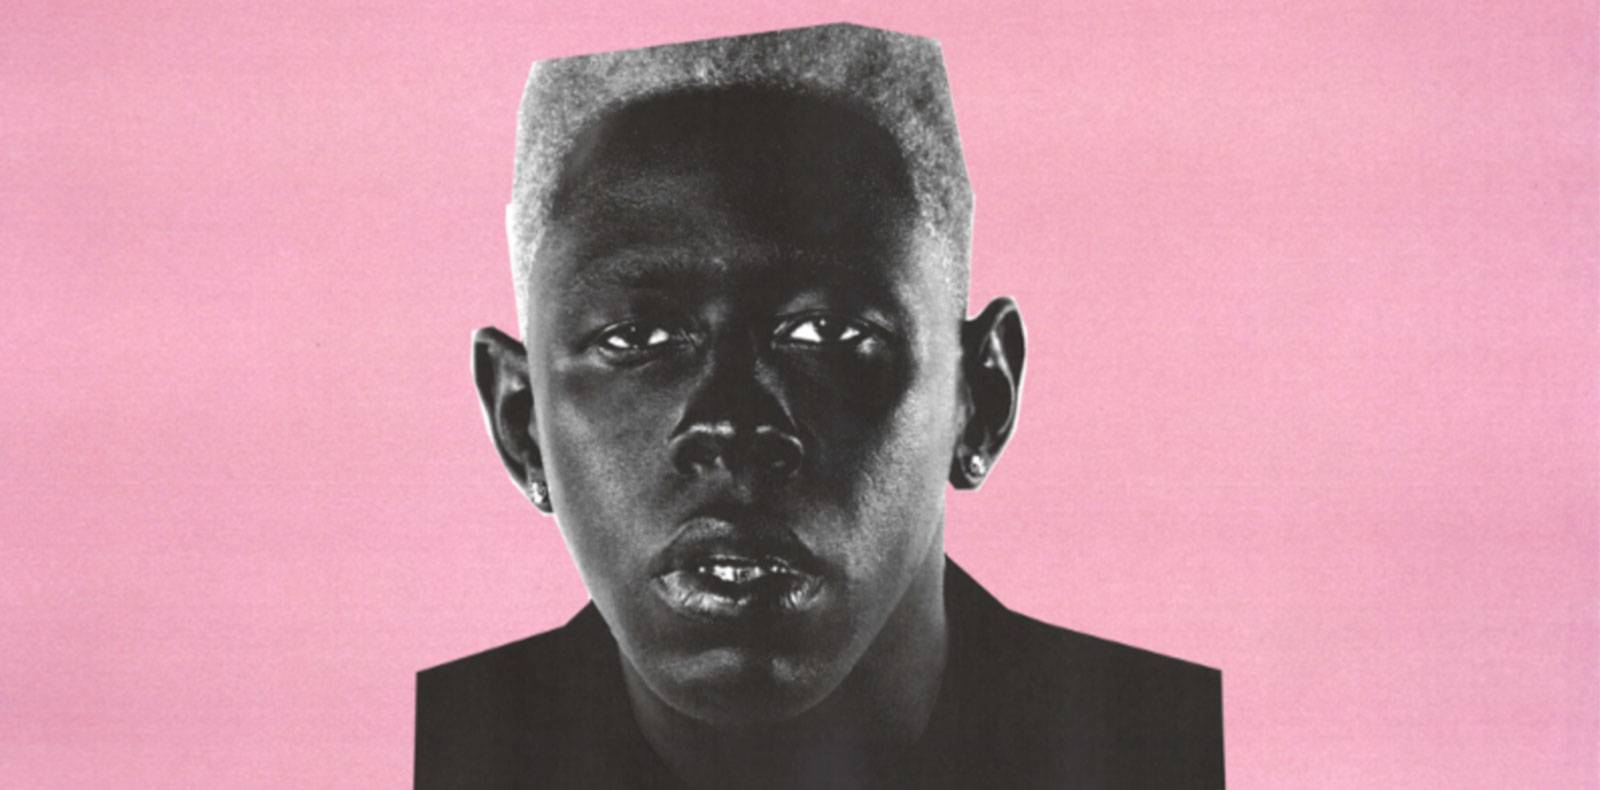 With “Igor”, Tyler, The Creator signs a future musical classic